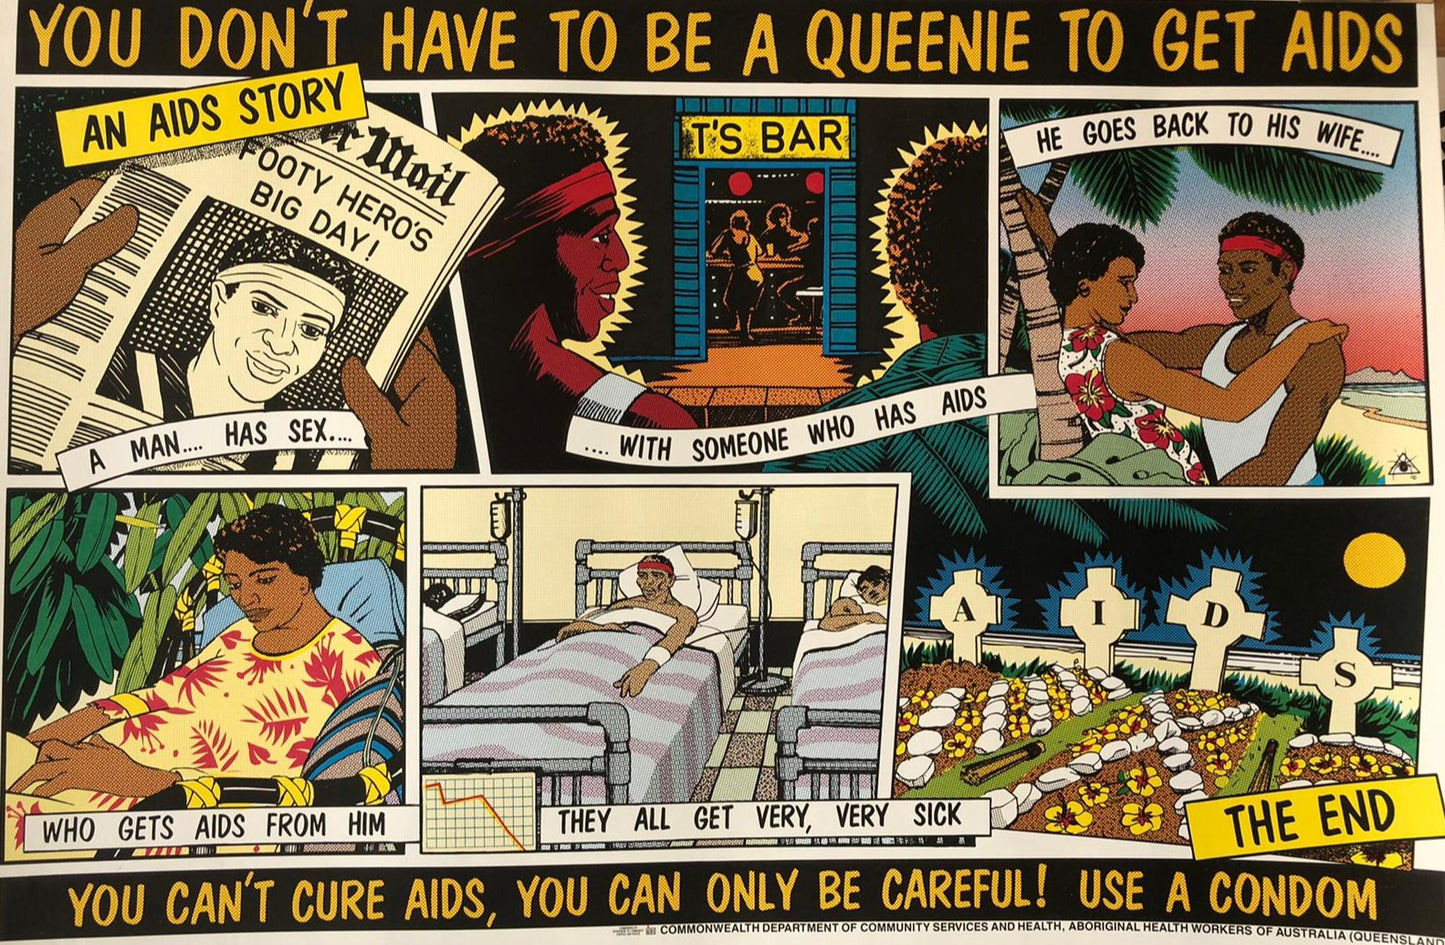 'You don't have to be a queenie to get AIDS' Campaign Poster by Stephen Lees